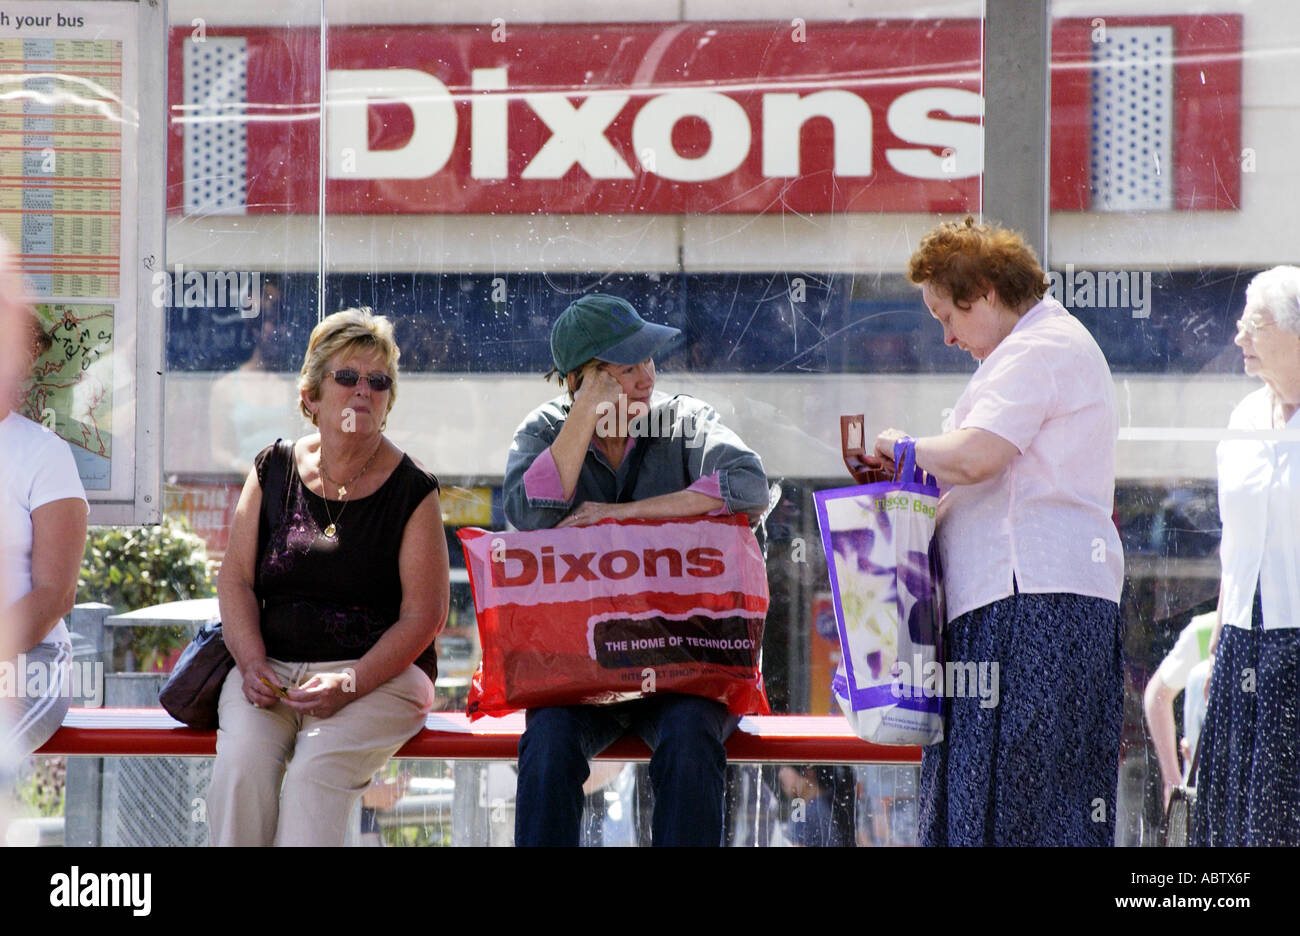 Women shoppers waiting at a bus stop outside a Dixons store Stock Photo